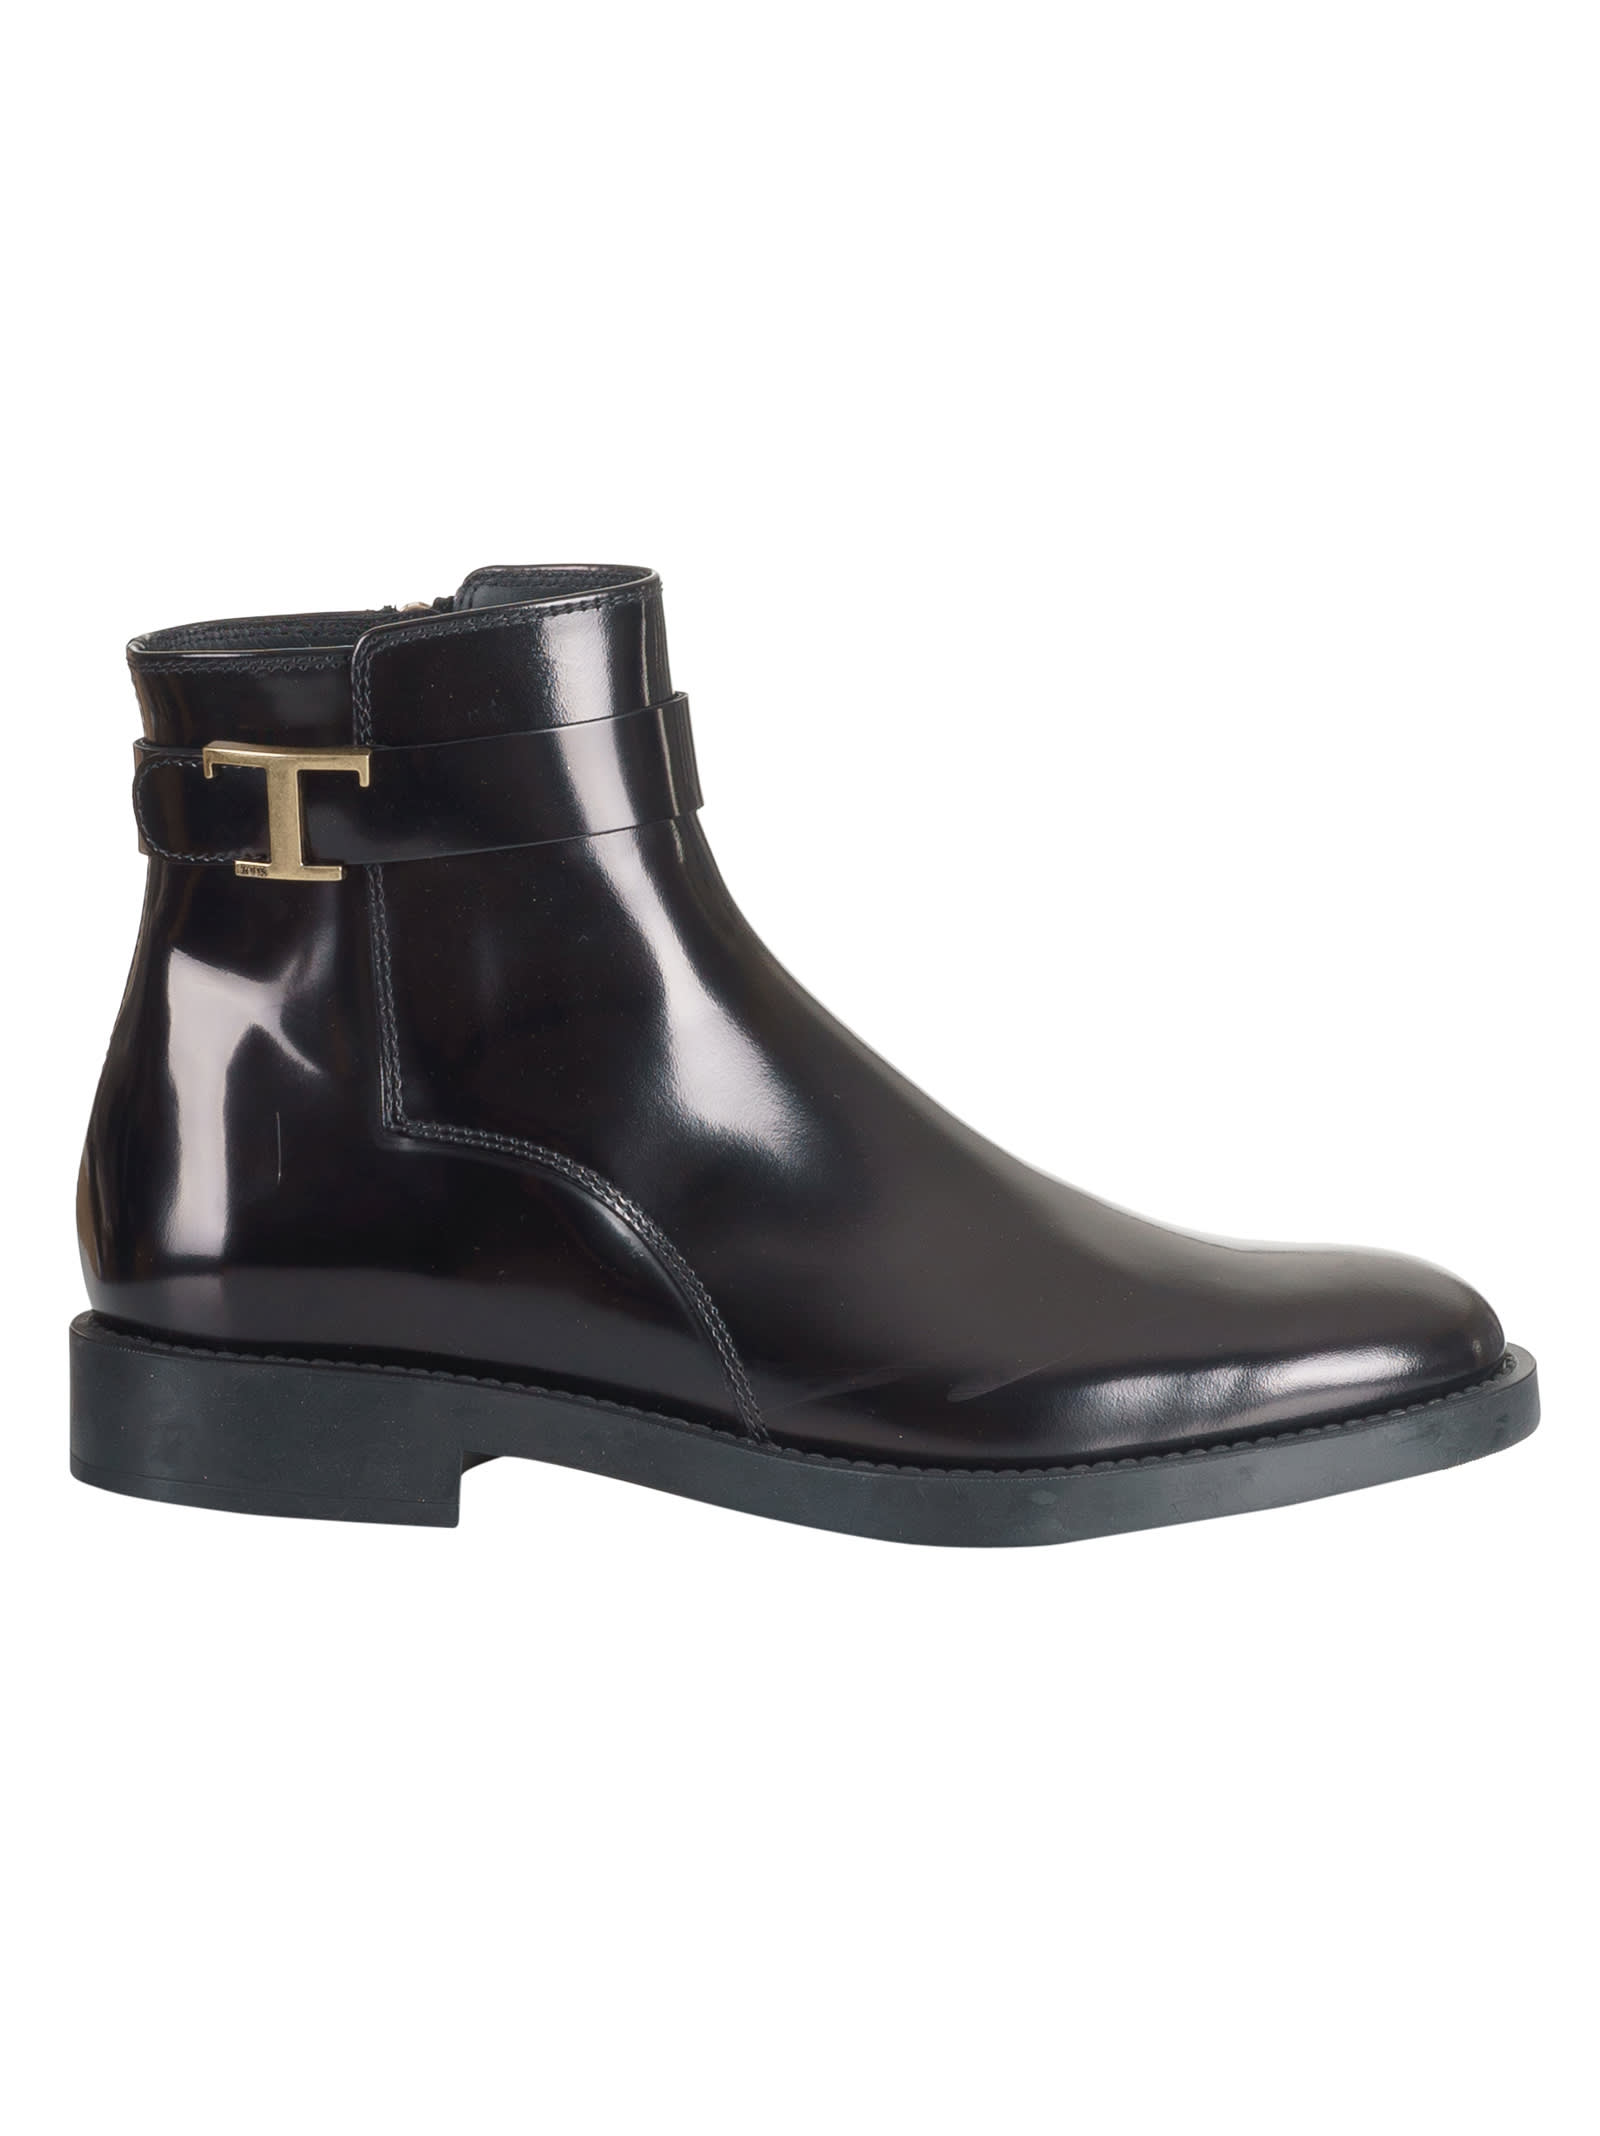 Tods Side-zip Logo Plaque Ankle Boots